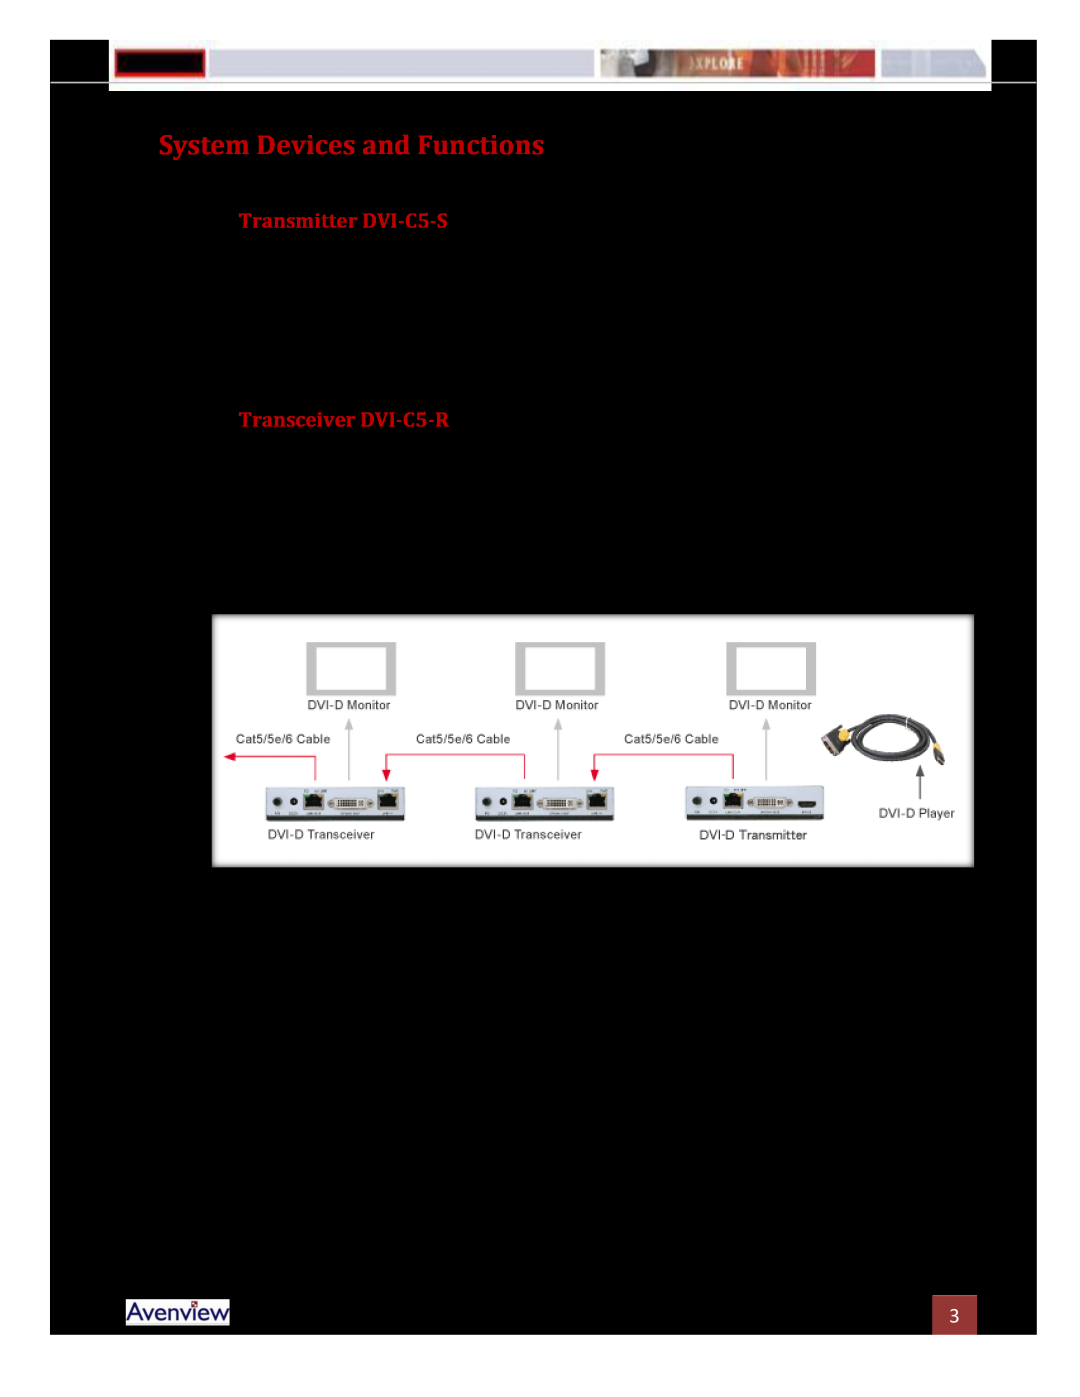 Avenview manual System Devices and Functions, Transmitter DVI-C5-S, Transceiver DVI-C5-R 